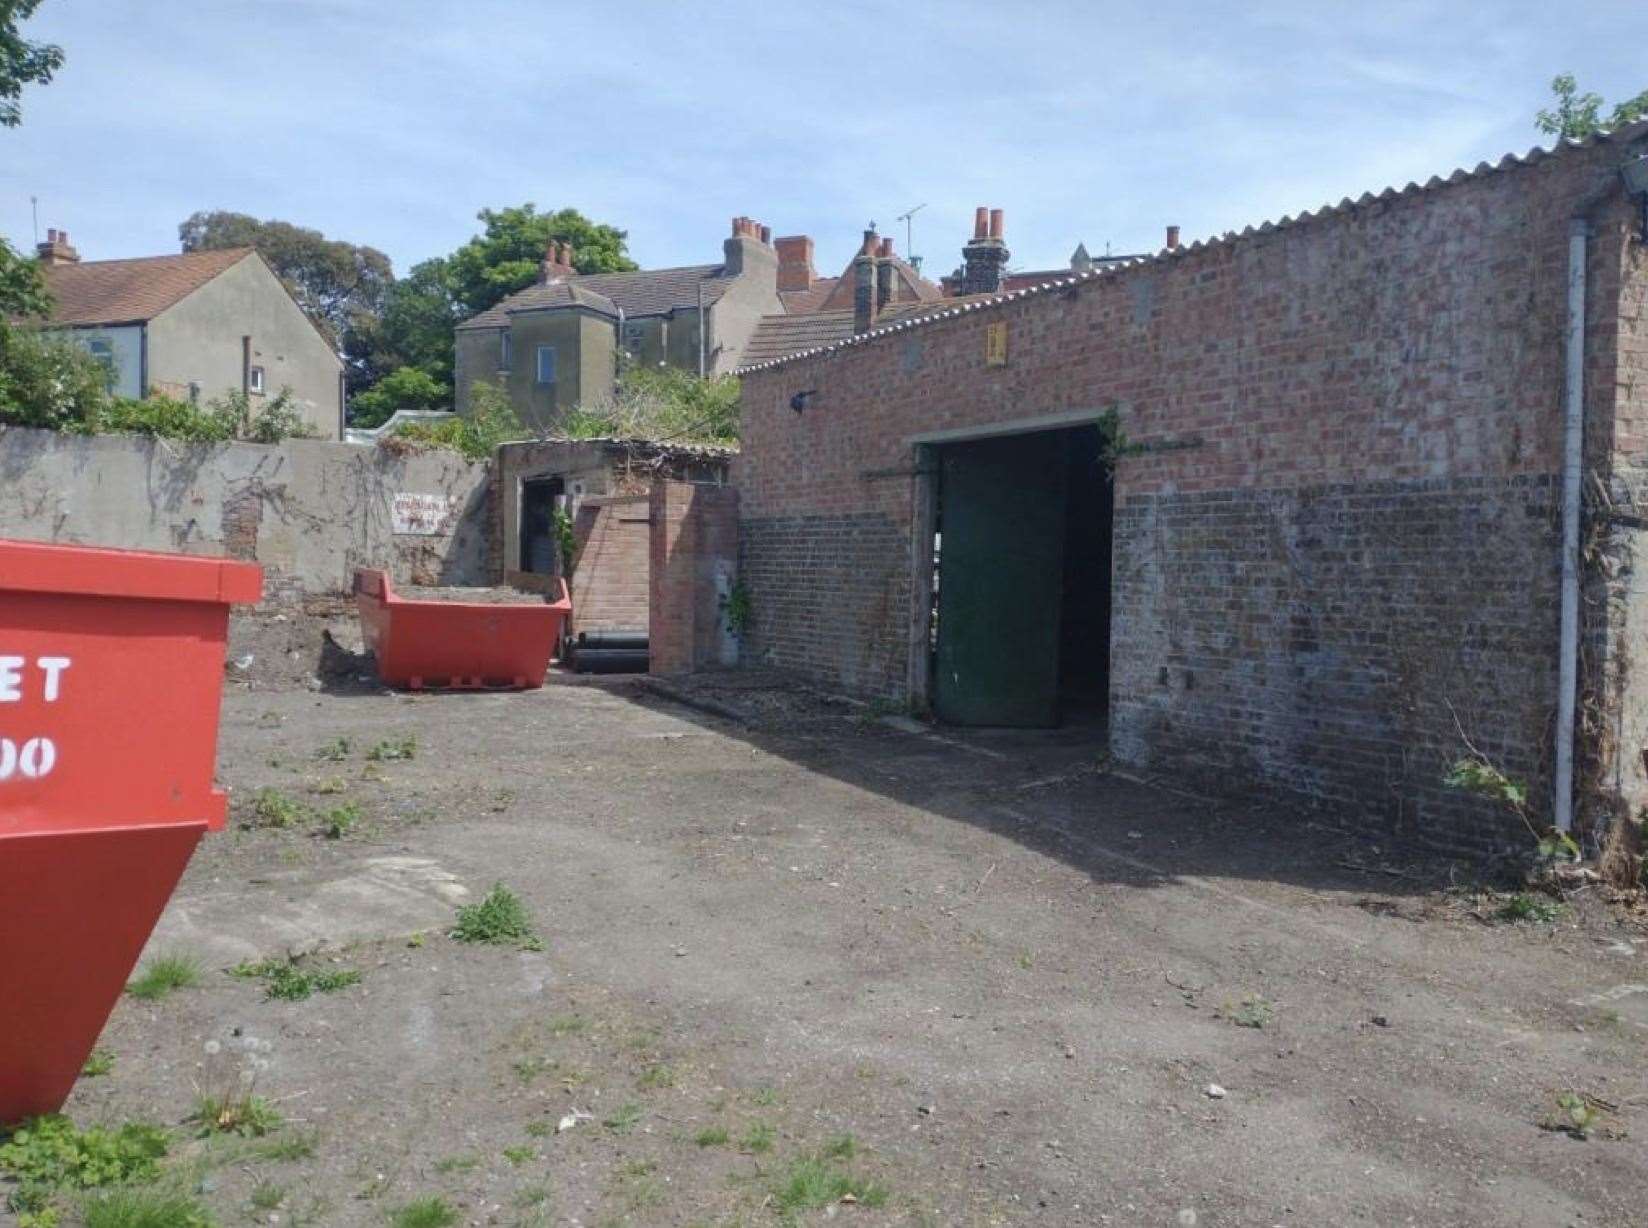 The site in Bristol Place, Ramsgate, could see as many as 16 full-time jobs created